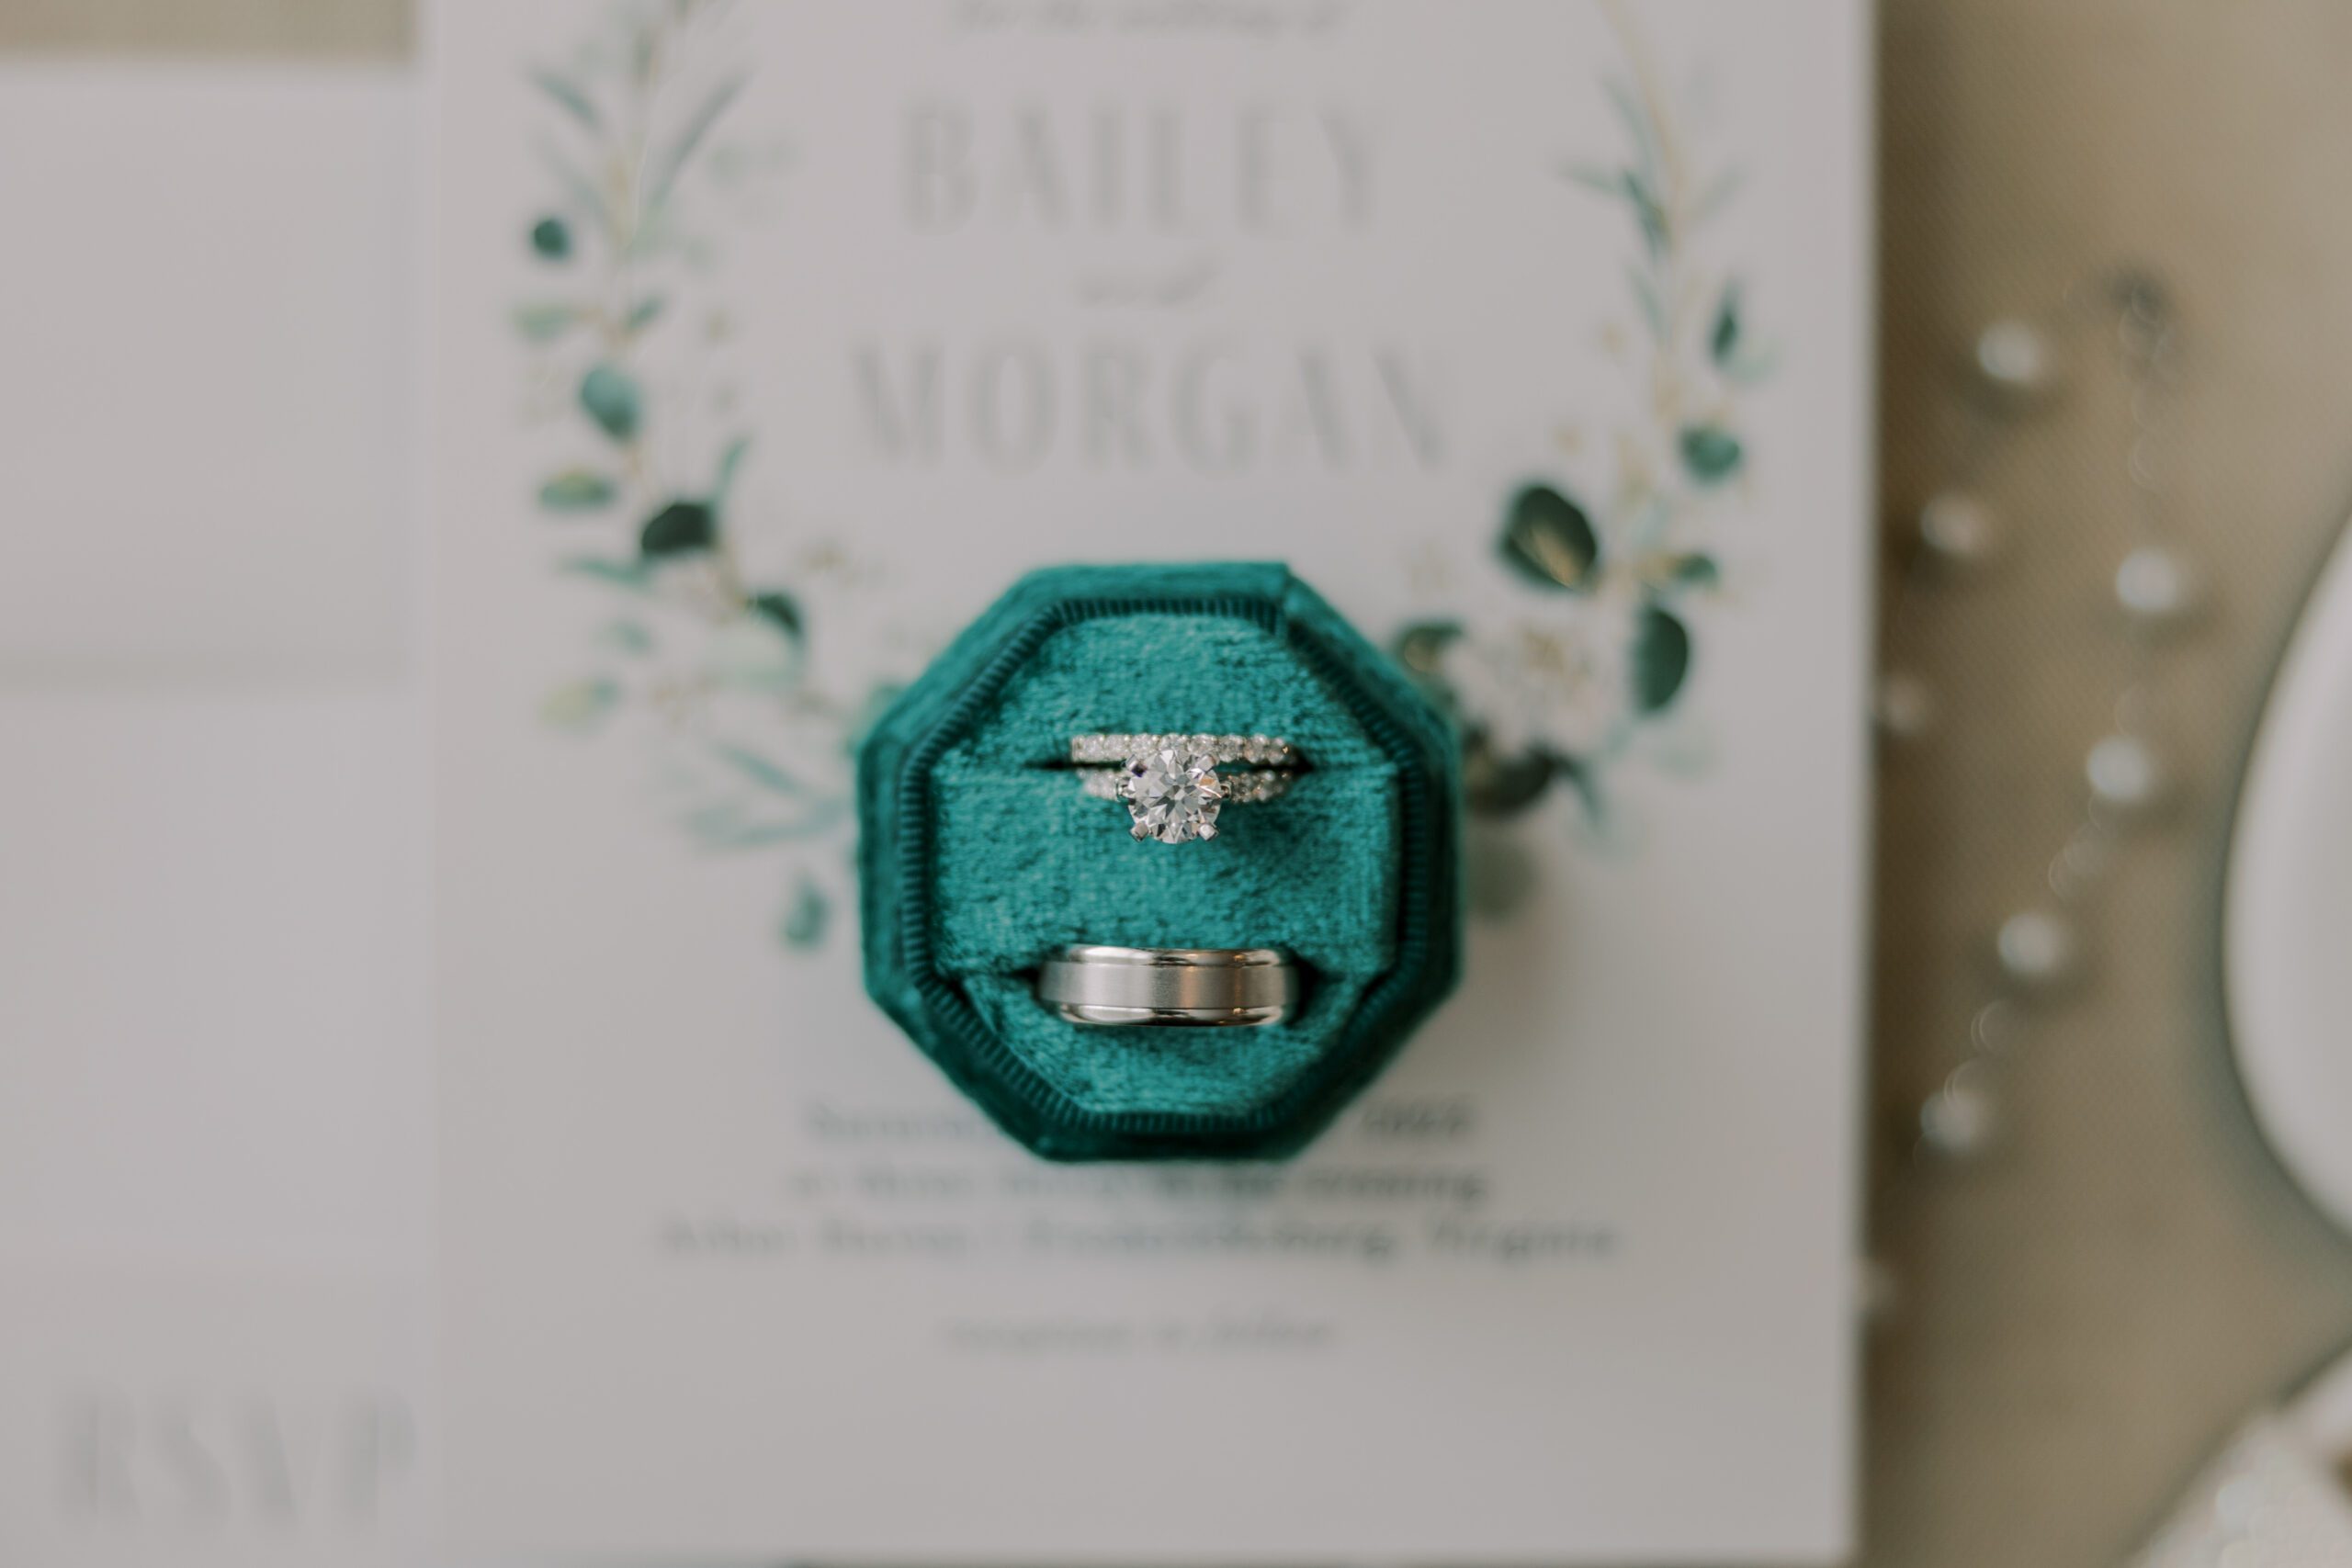 Close up photo of bride and groom's rings in an octagon shaped green velvet ring box, invitation is out of focus in background